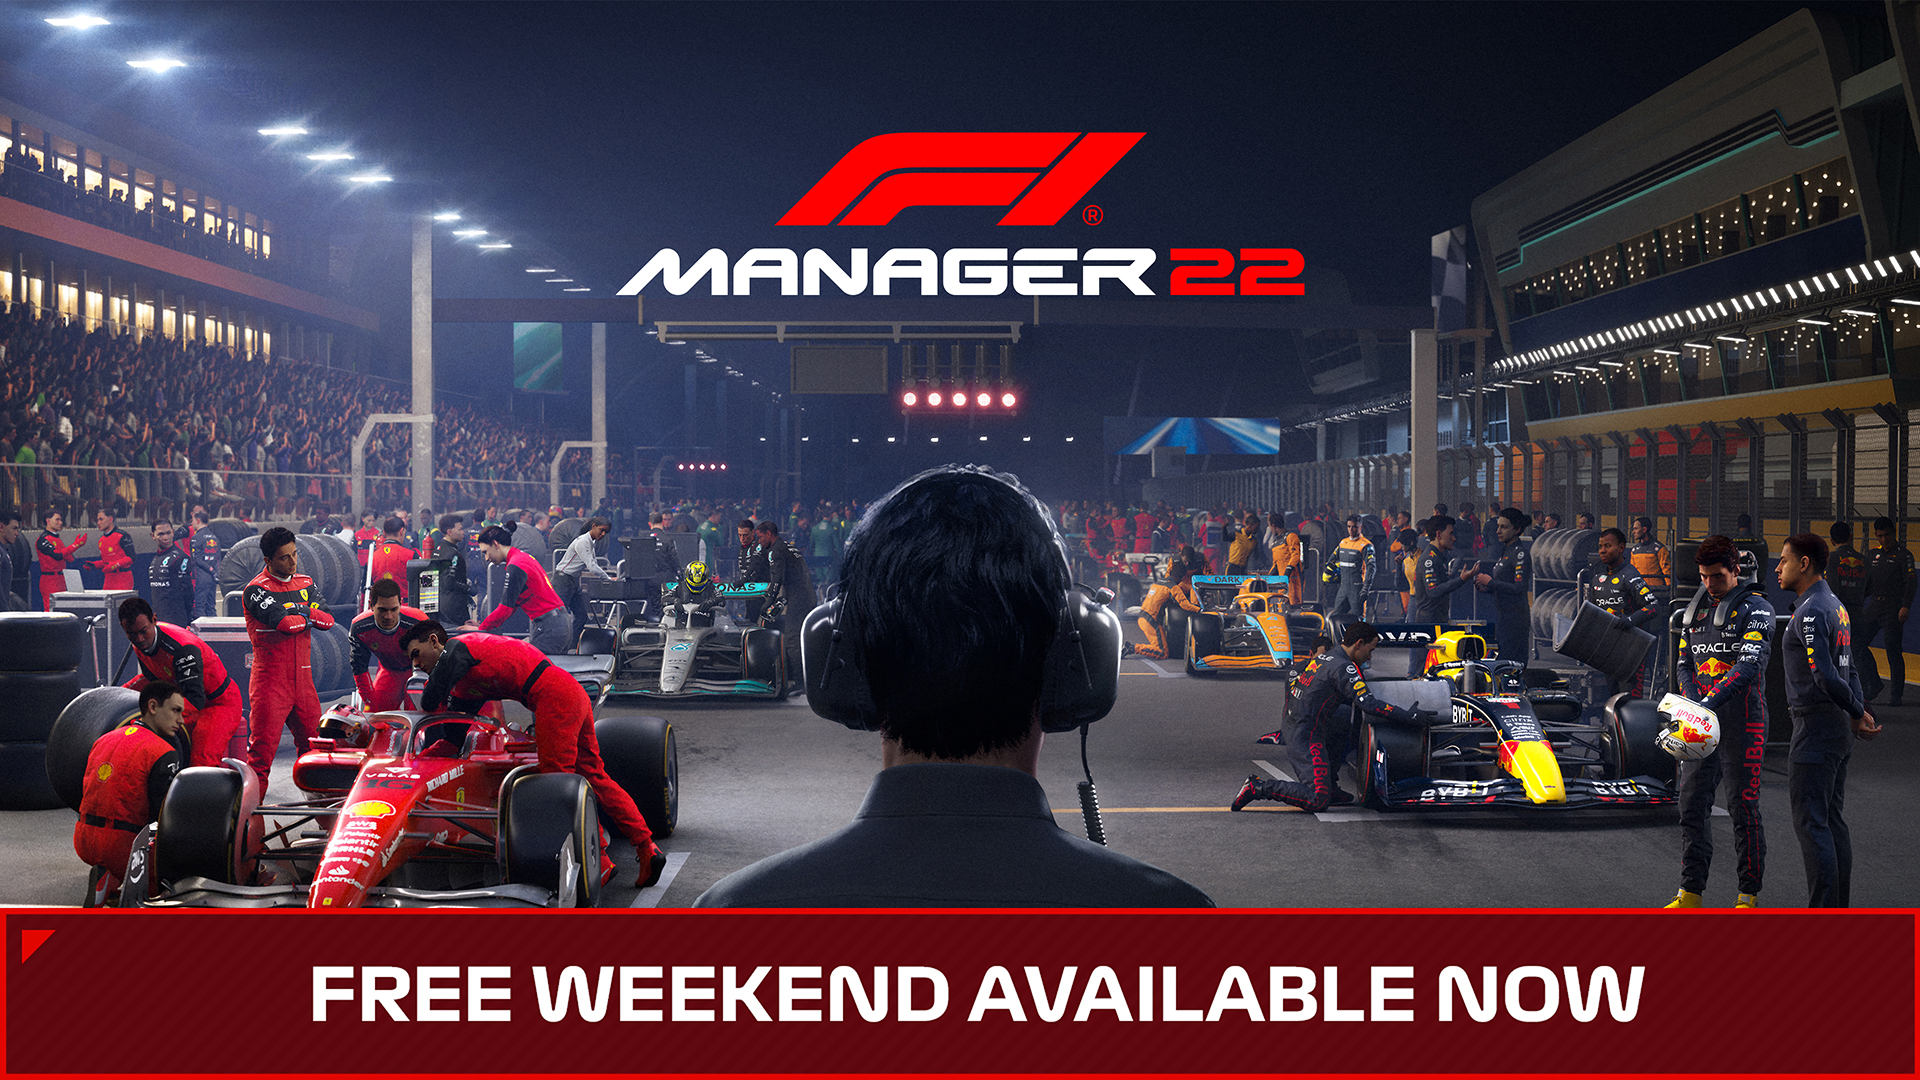 F1 Manager 2022 free to play during Bahrain GP weekend RaceDepartment